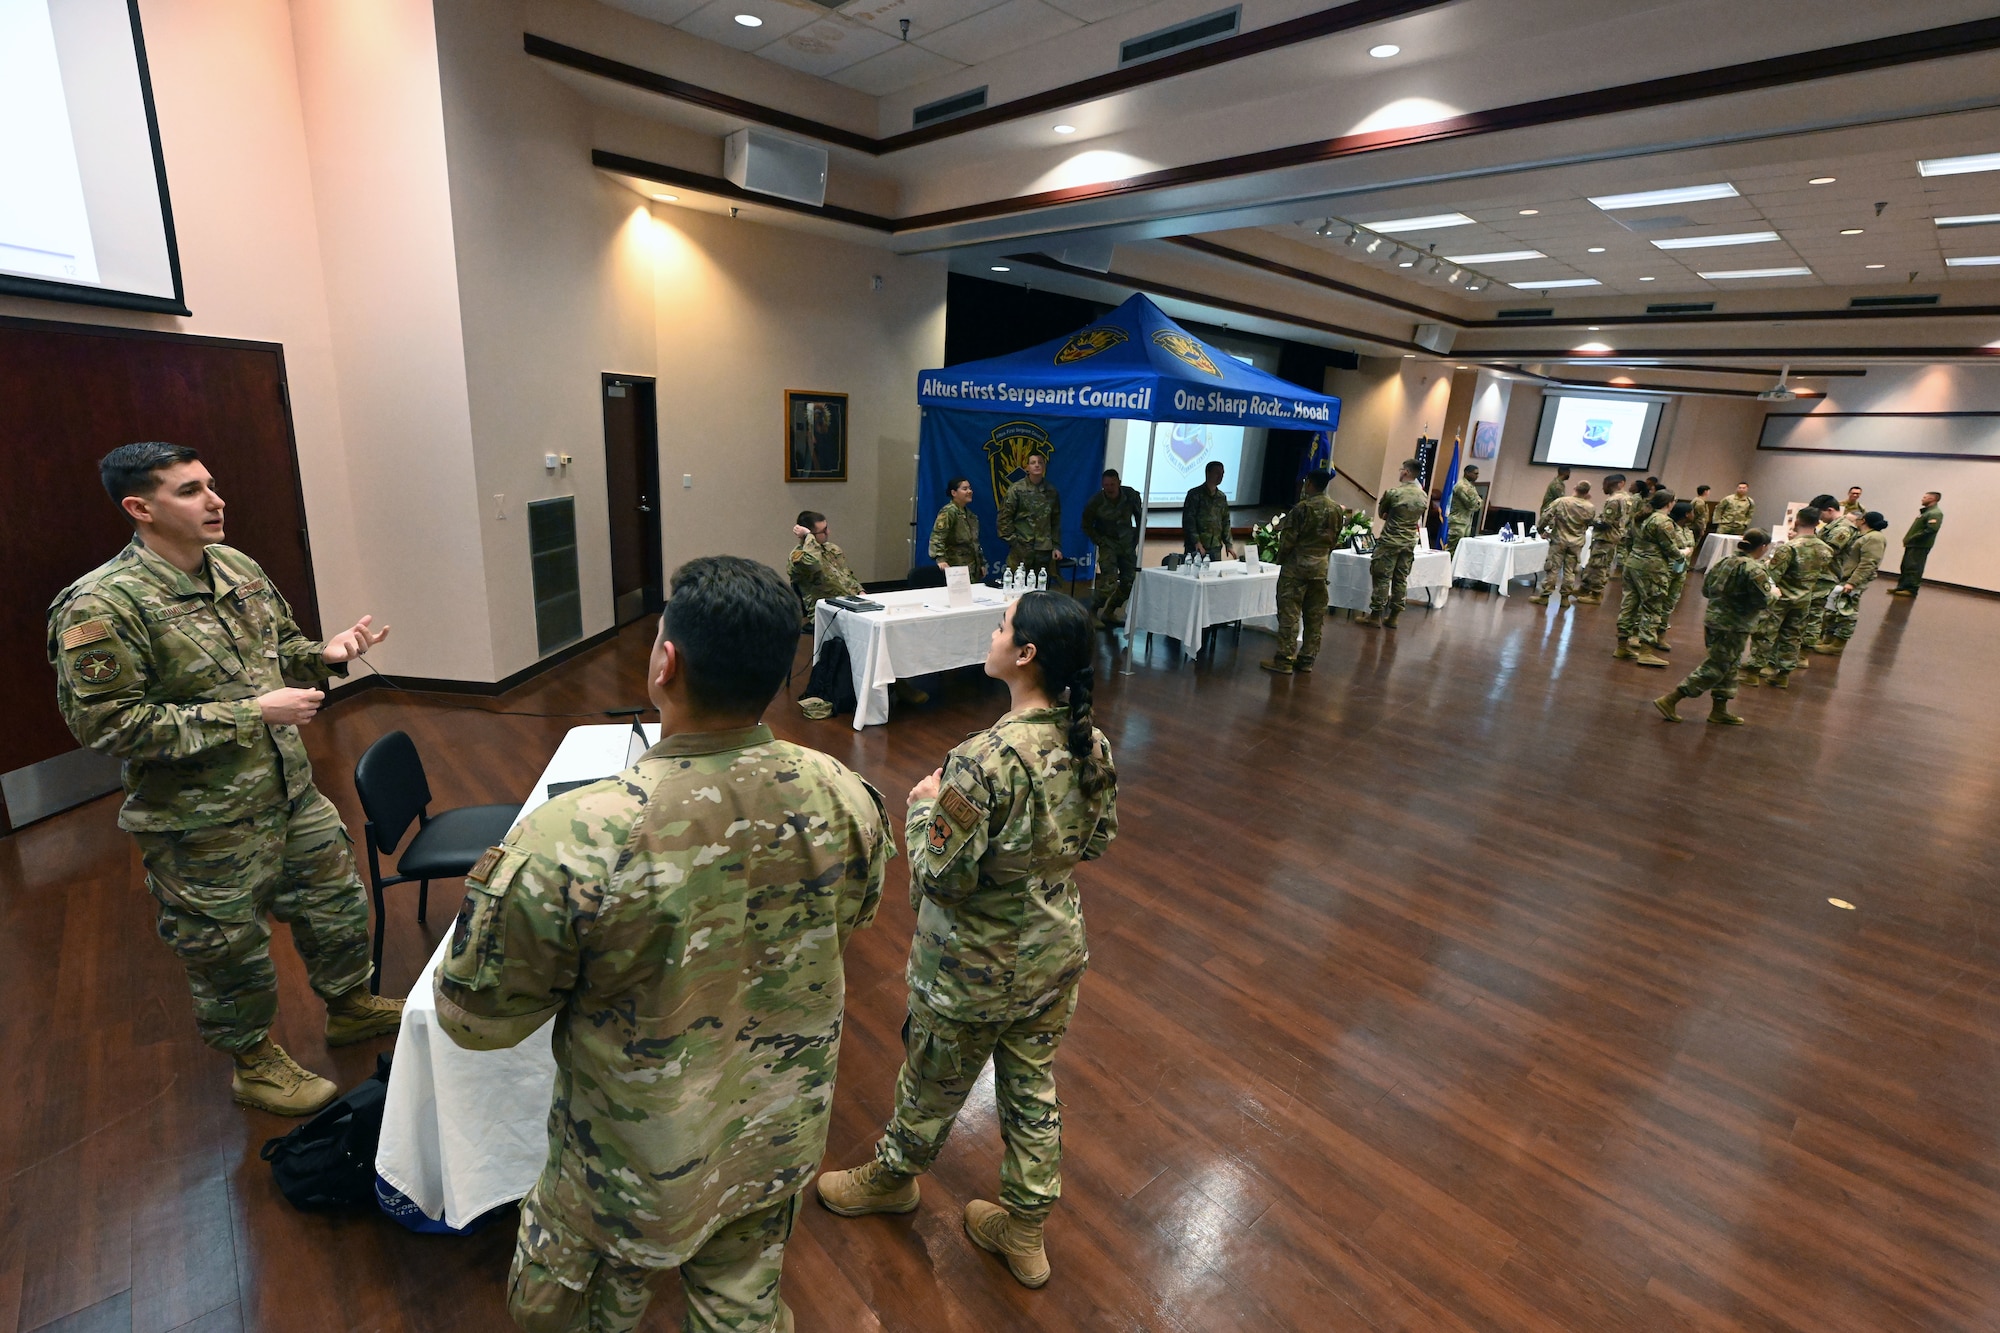 Airmen talk with each other at a developmental special duties fair at Altus Air Force Base, Oklahoma, March 2, 2023. Airmen who formerly served in a special duty attended the event to pass on knowledge to others interested in various career paths. (U.S. Air Force photo by Master Sgt. Nathan Allen)